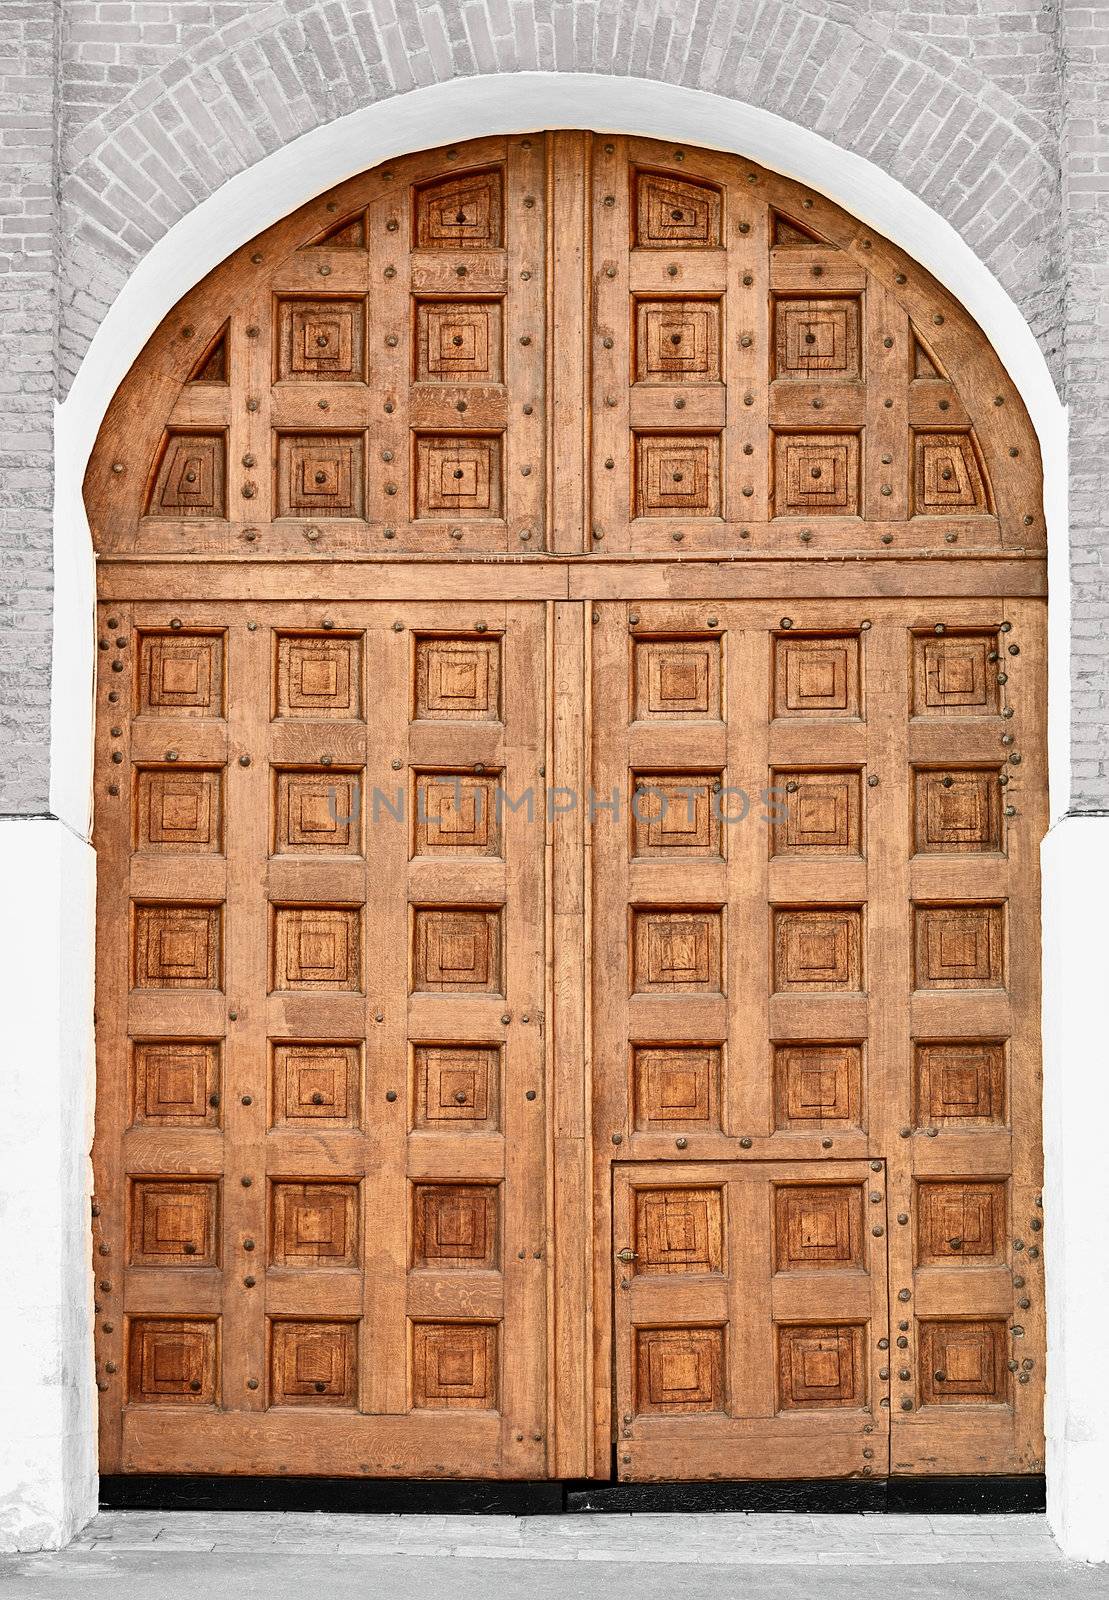 The huge old wooden gate - the Moscow Kremlin, Russia.